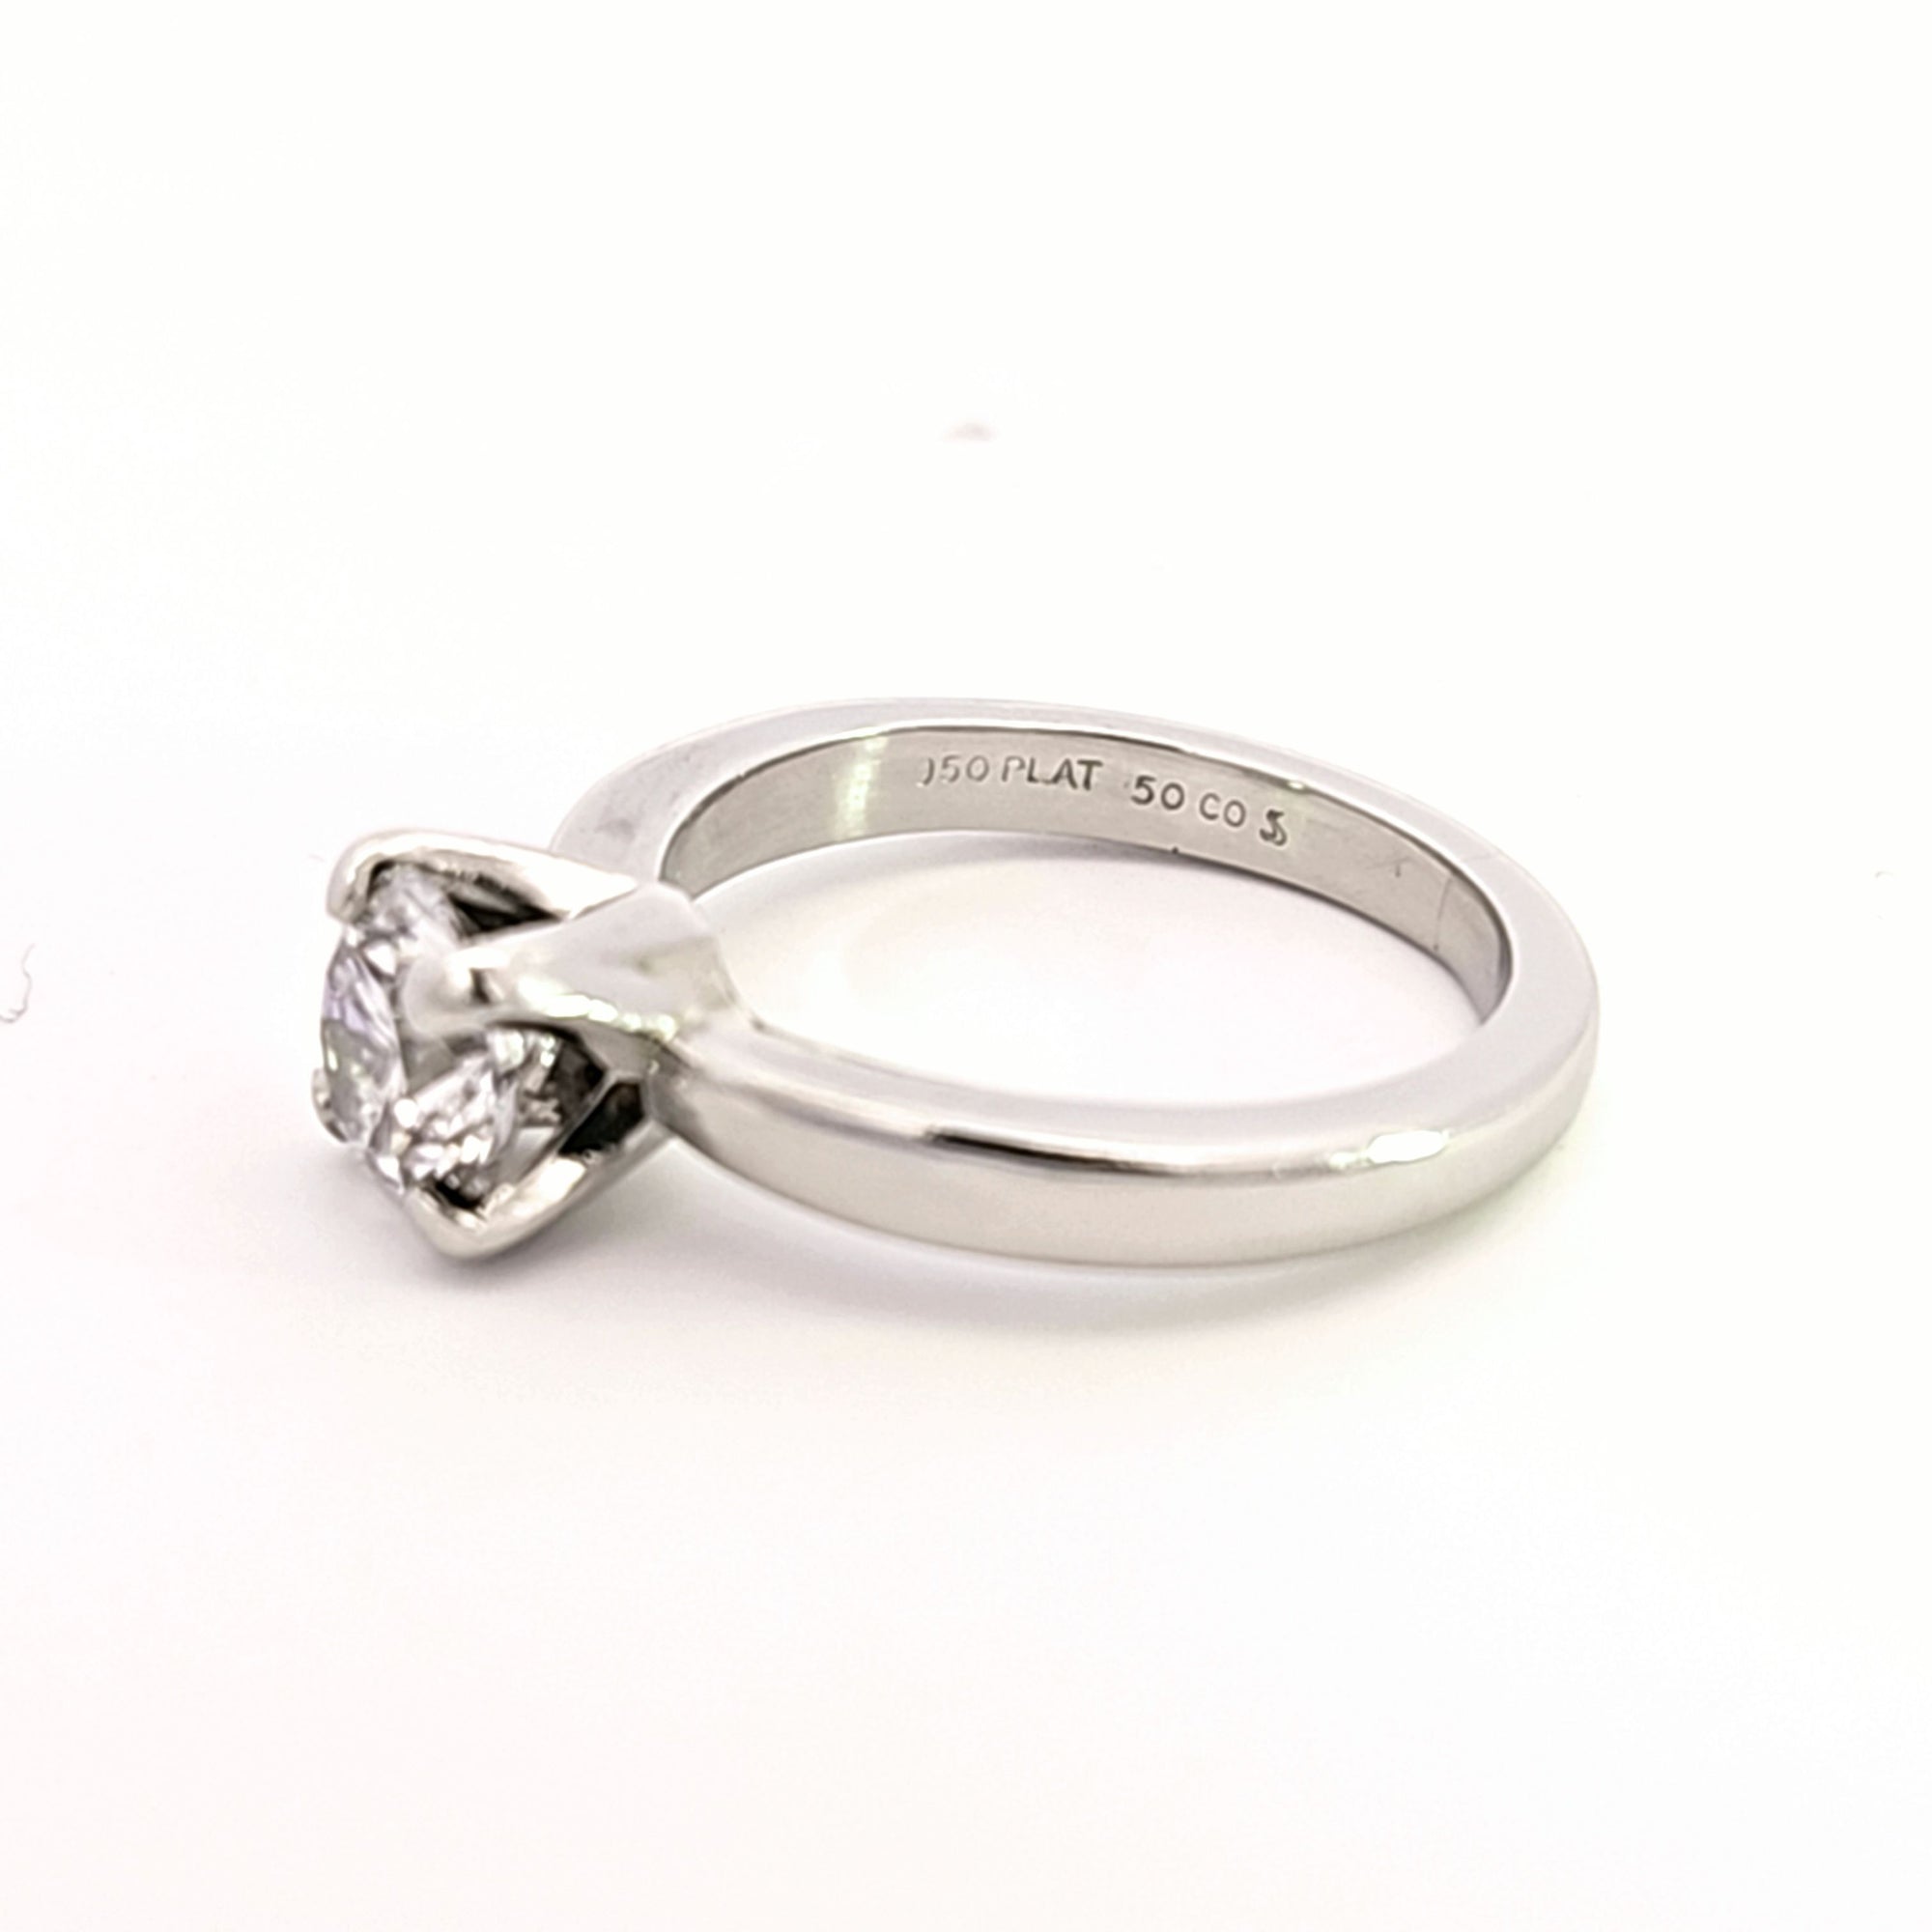 Solitaire Canadian Diamond Engagement Ring | 1.09ct | SZ 5.25 |